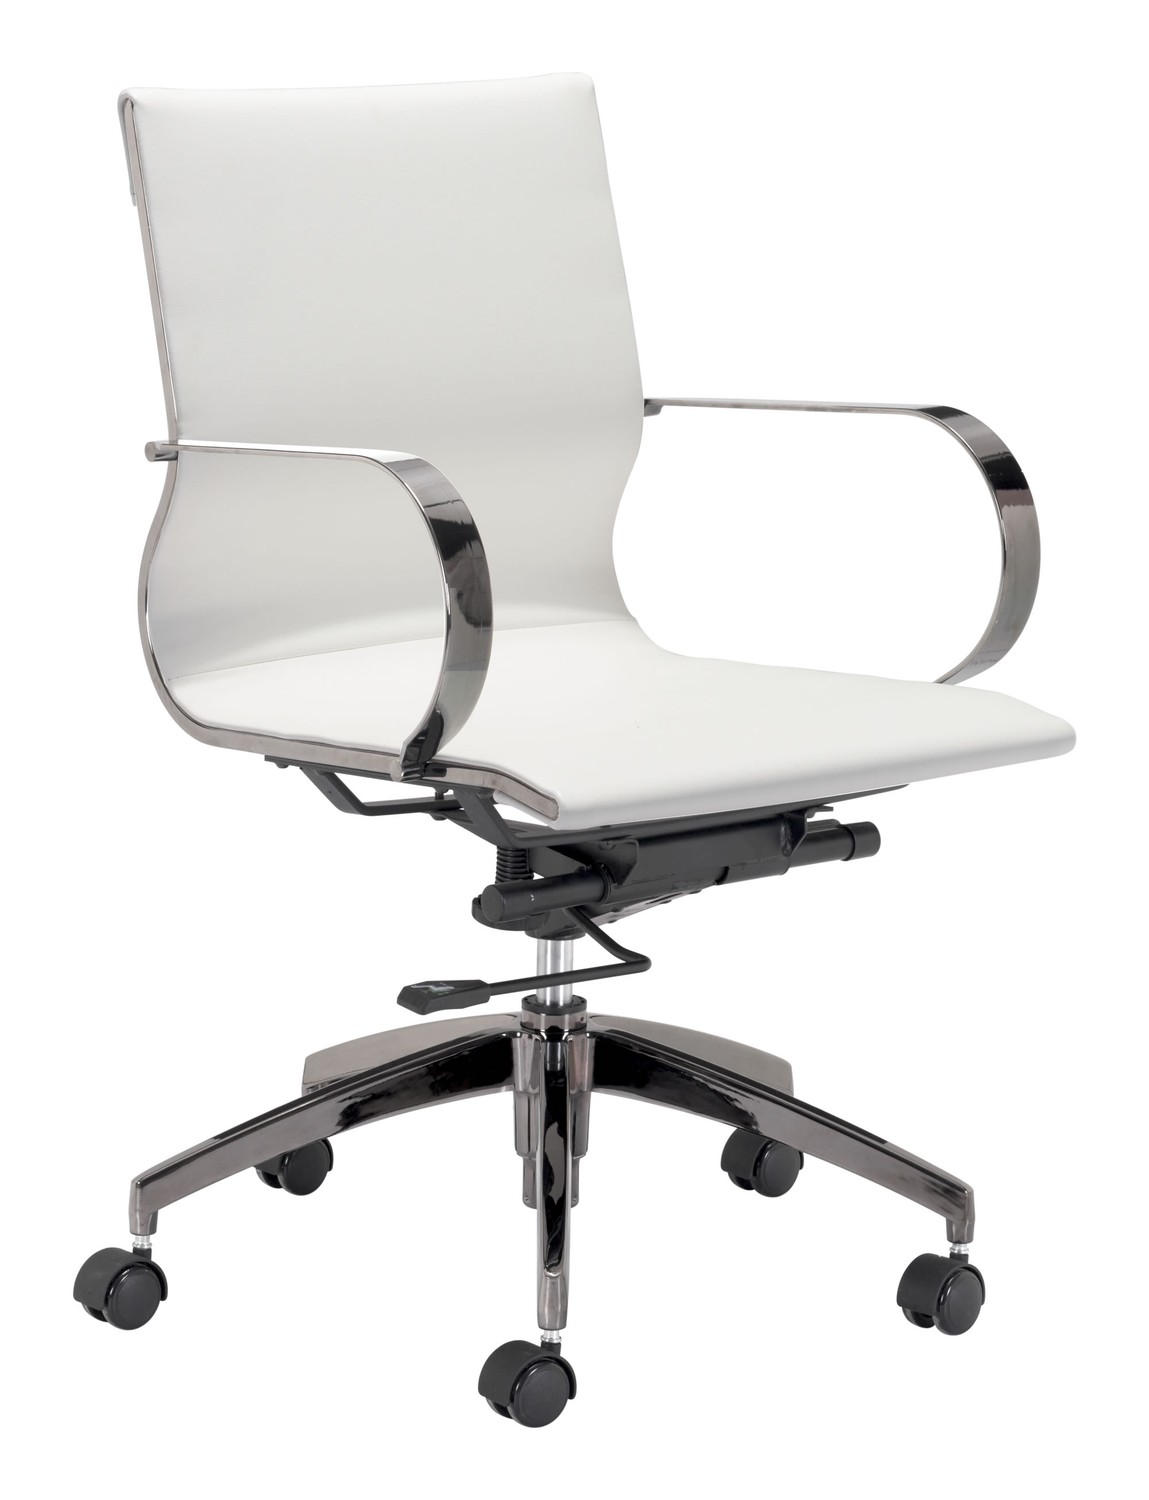 27" x 27" x 34.3" White Leatherette Stainless Steel Office Chair